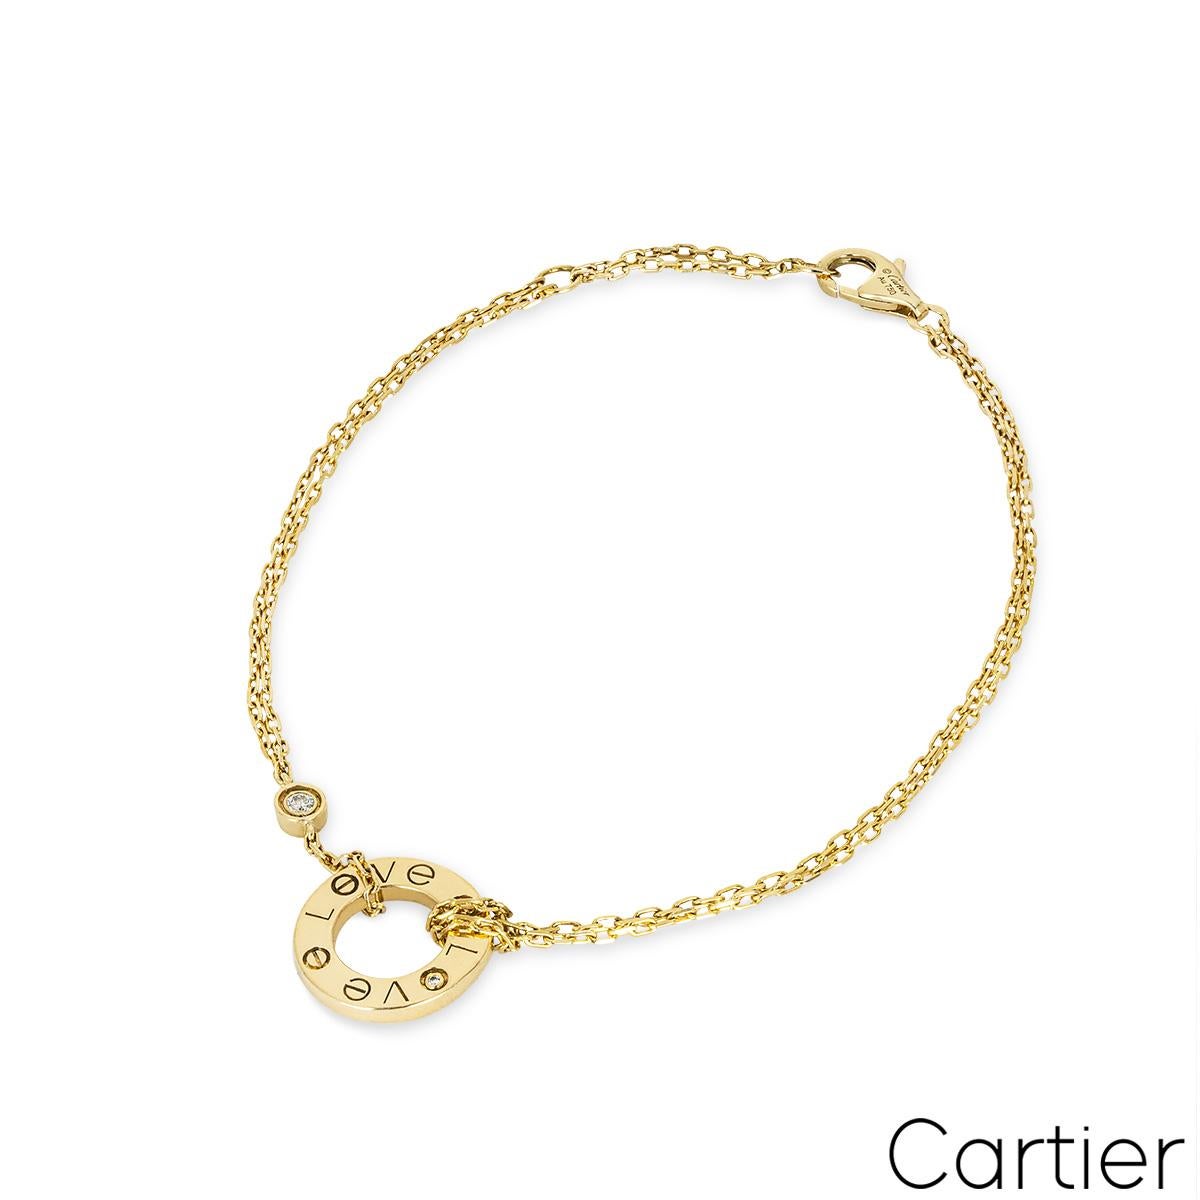 An 18k yellow gold bracelet by Cartier from the Love collection. The bracelet features a double yellow gold bracelet knotted to an open circular motif engraved with 'LOVE', the 'O' is set with a single round brilliant cut diamond. The bracelet is